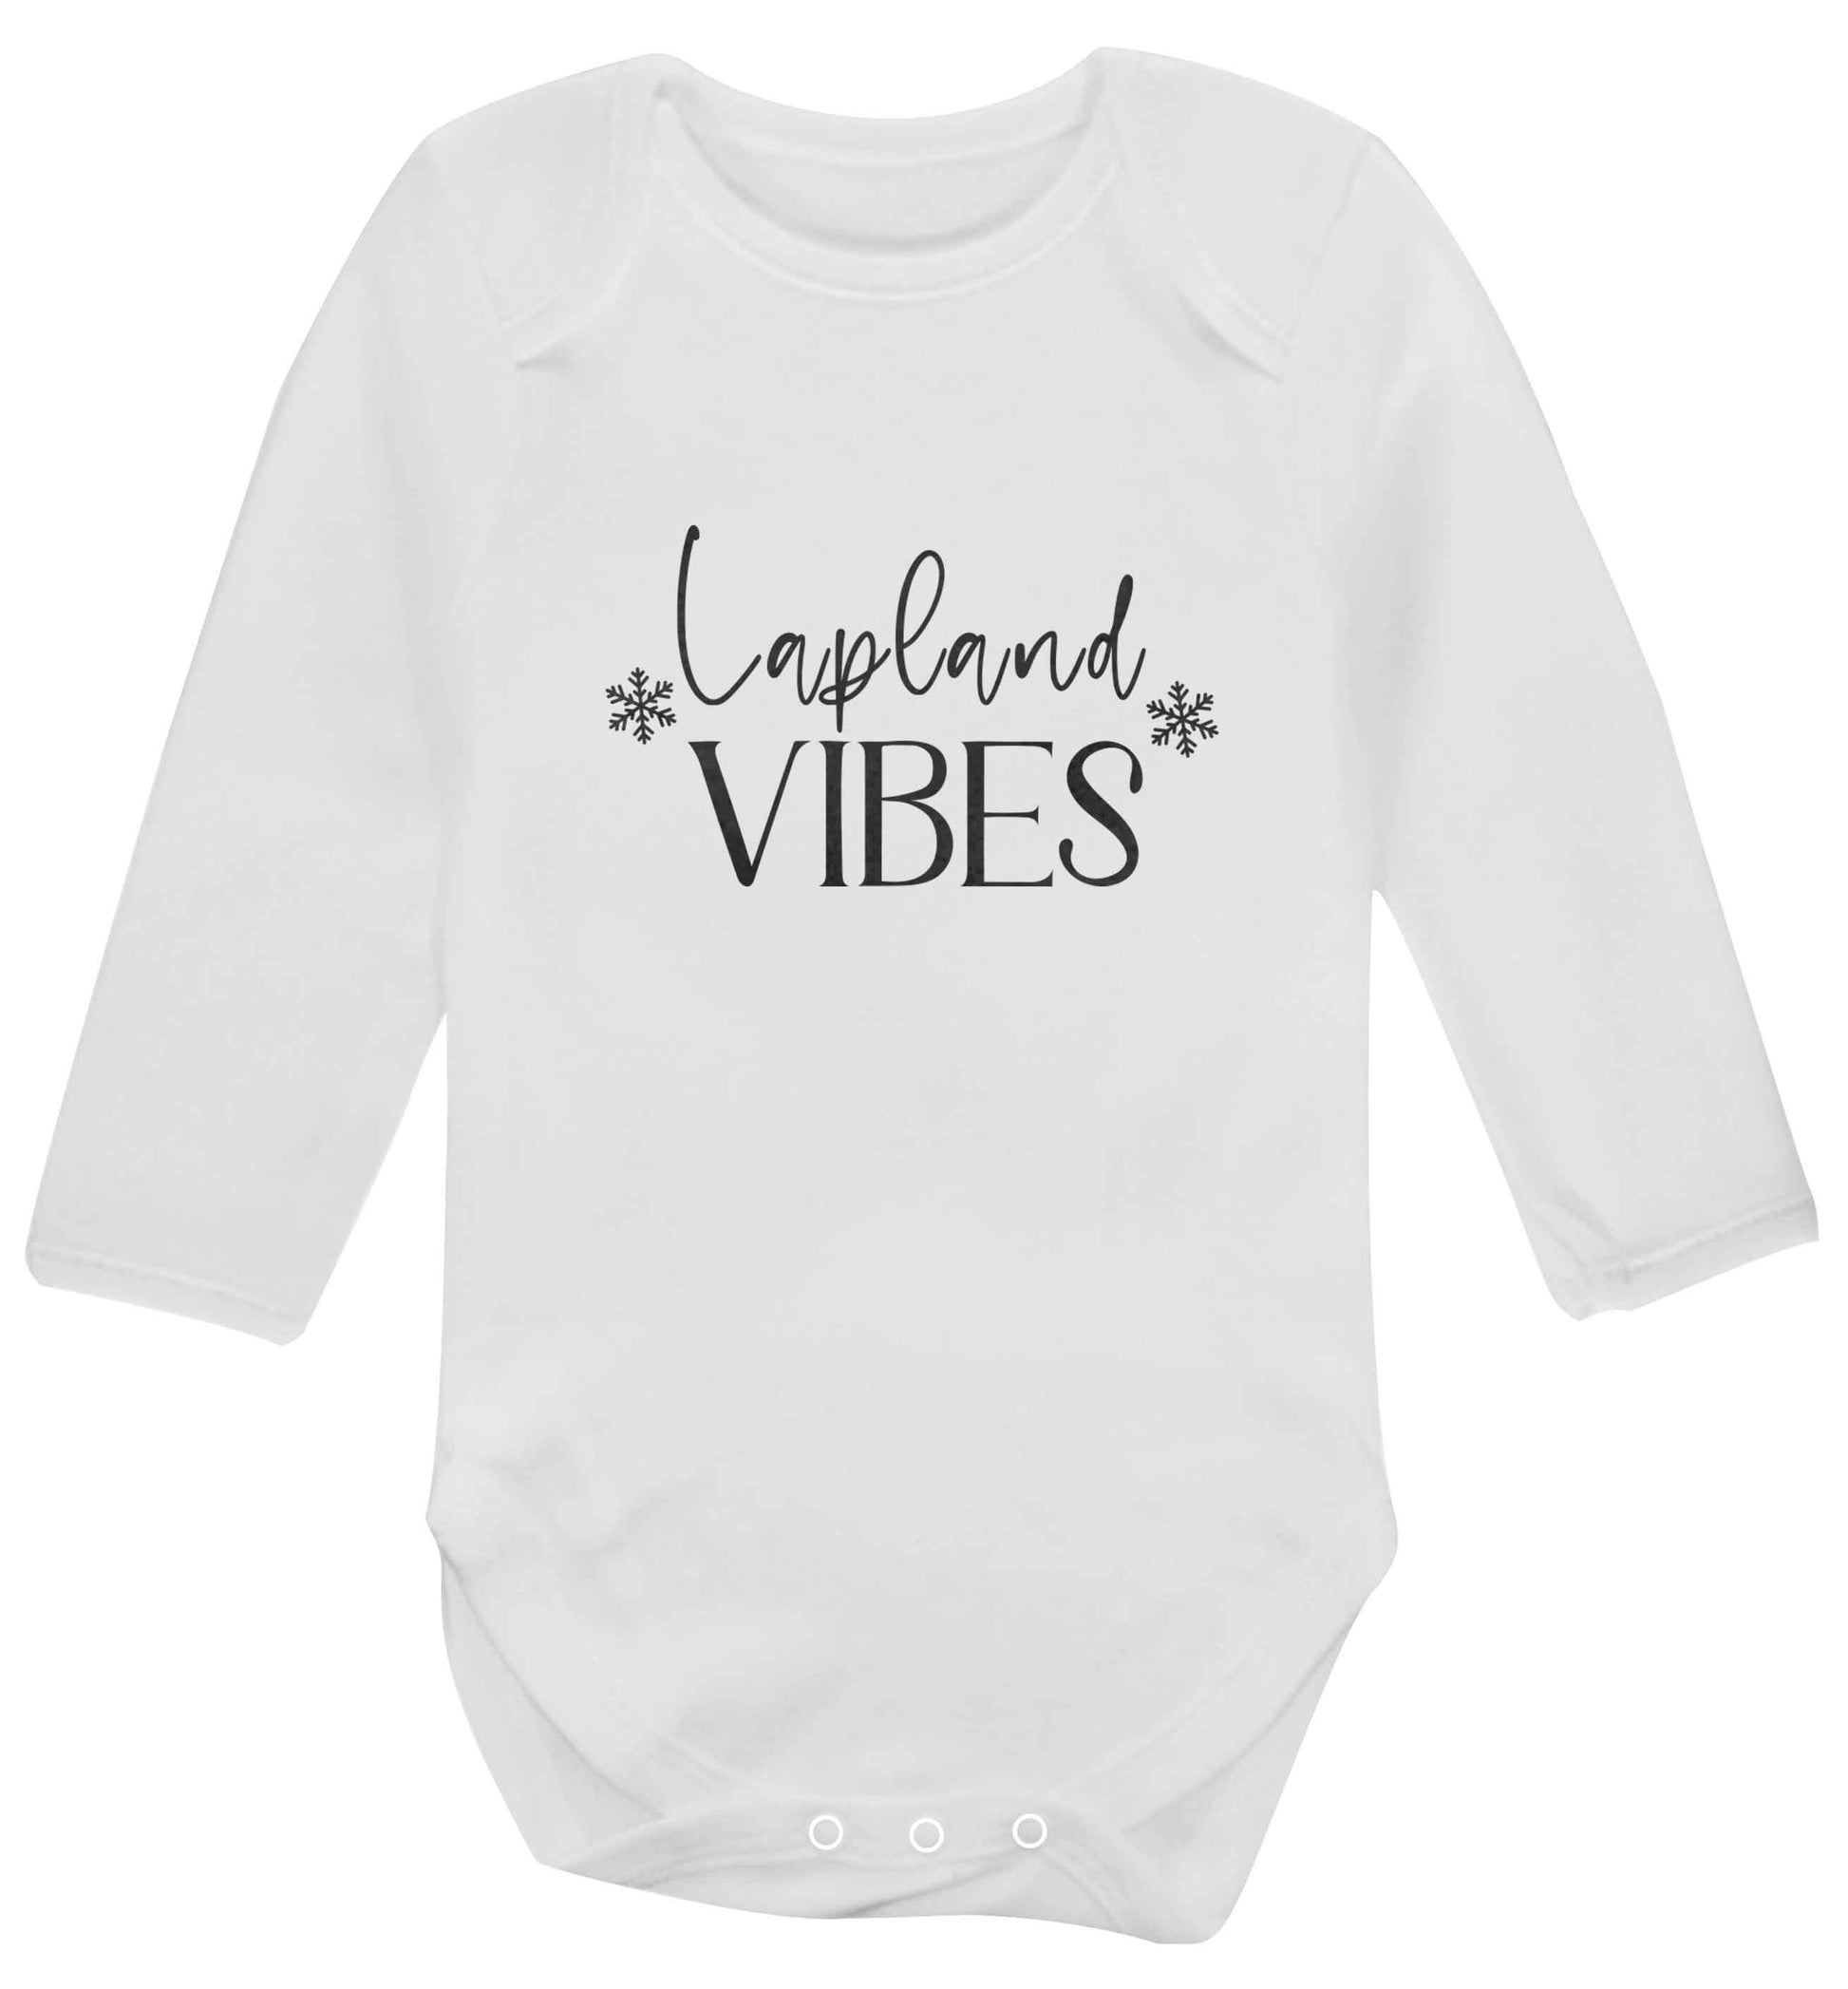 Lapland vibes baby vest long sleeved white 6-12 months